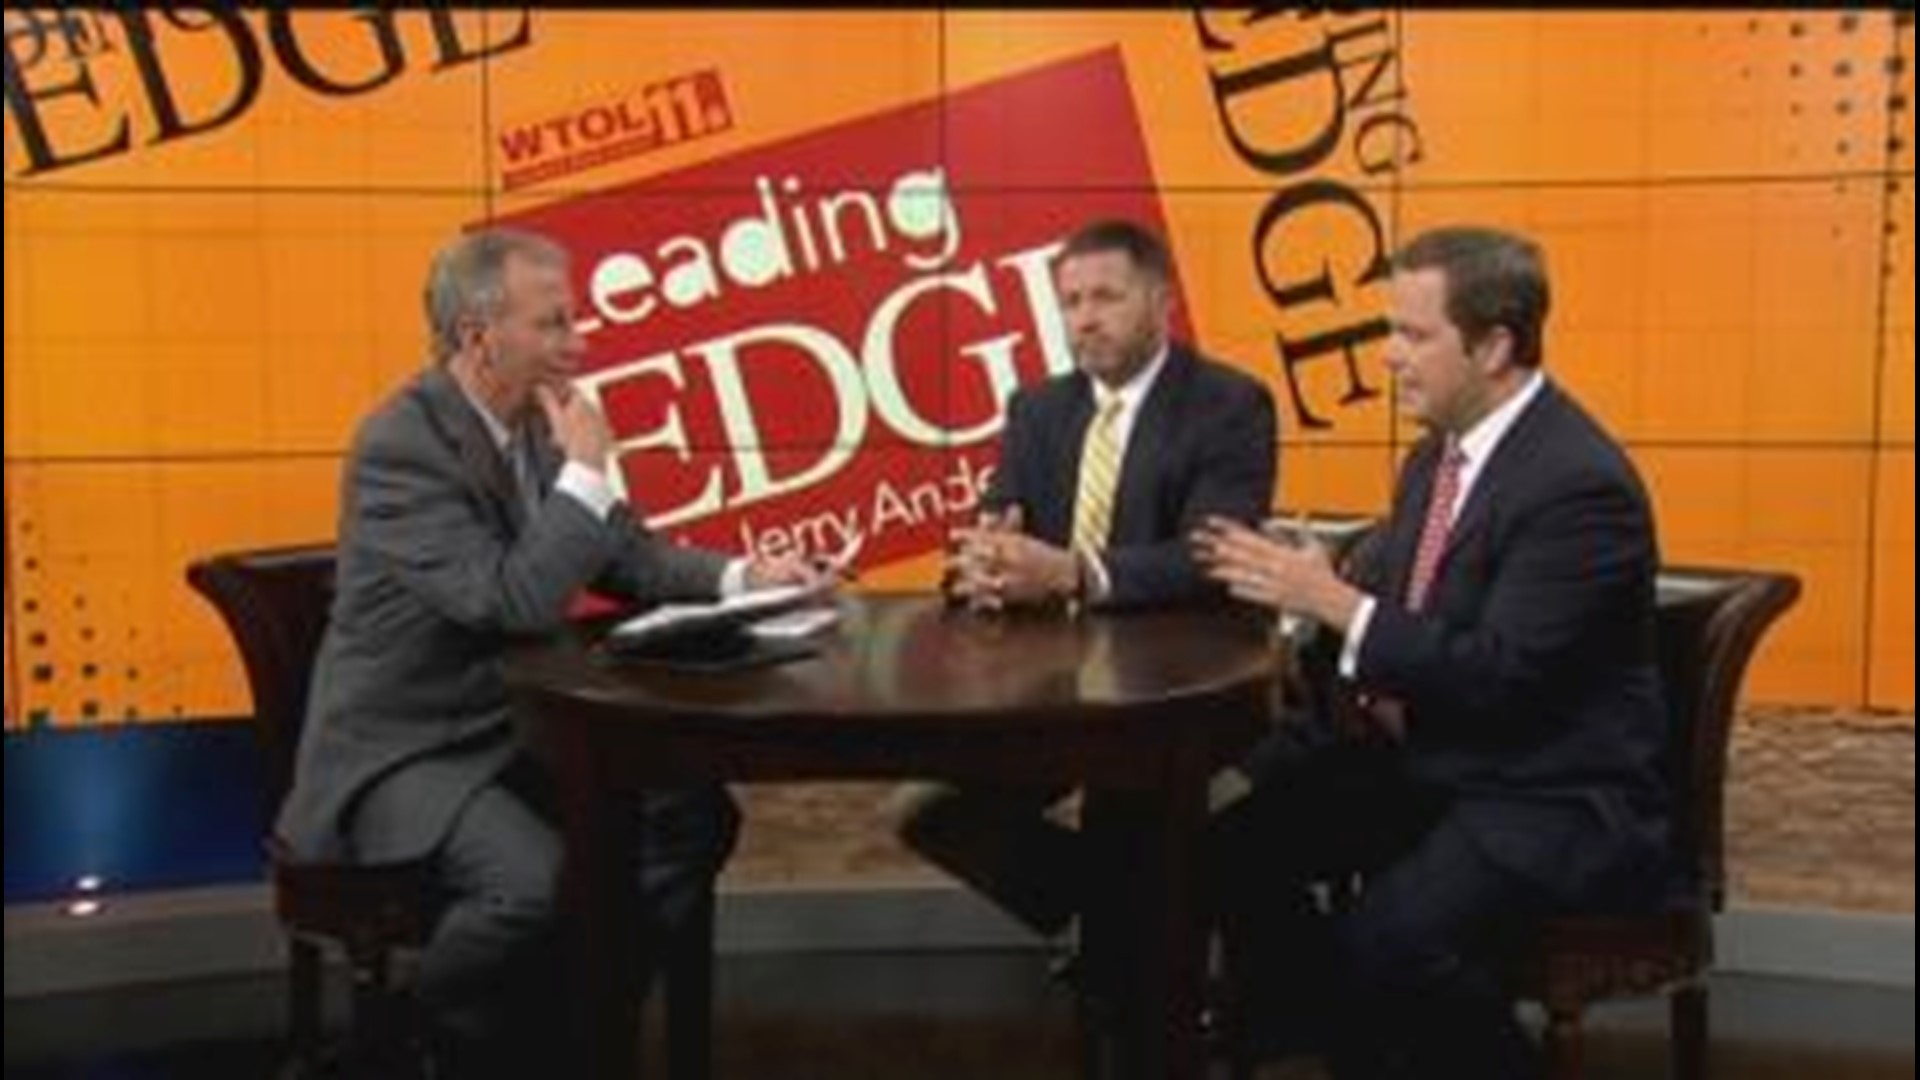 Dec. 3: Leading Edge with Jerry Anderson - Part 2